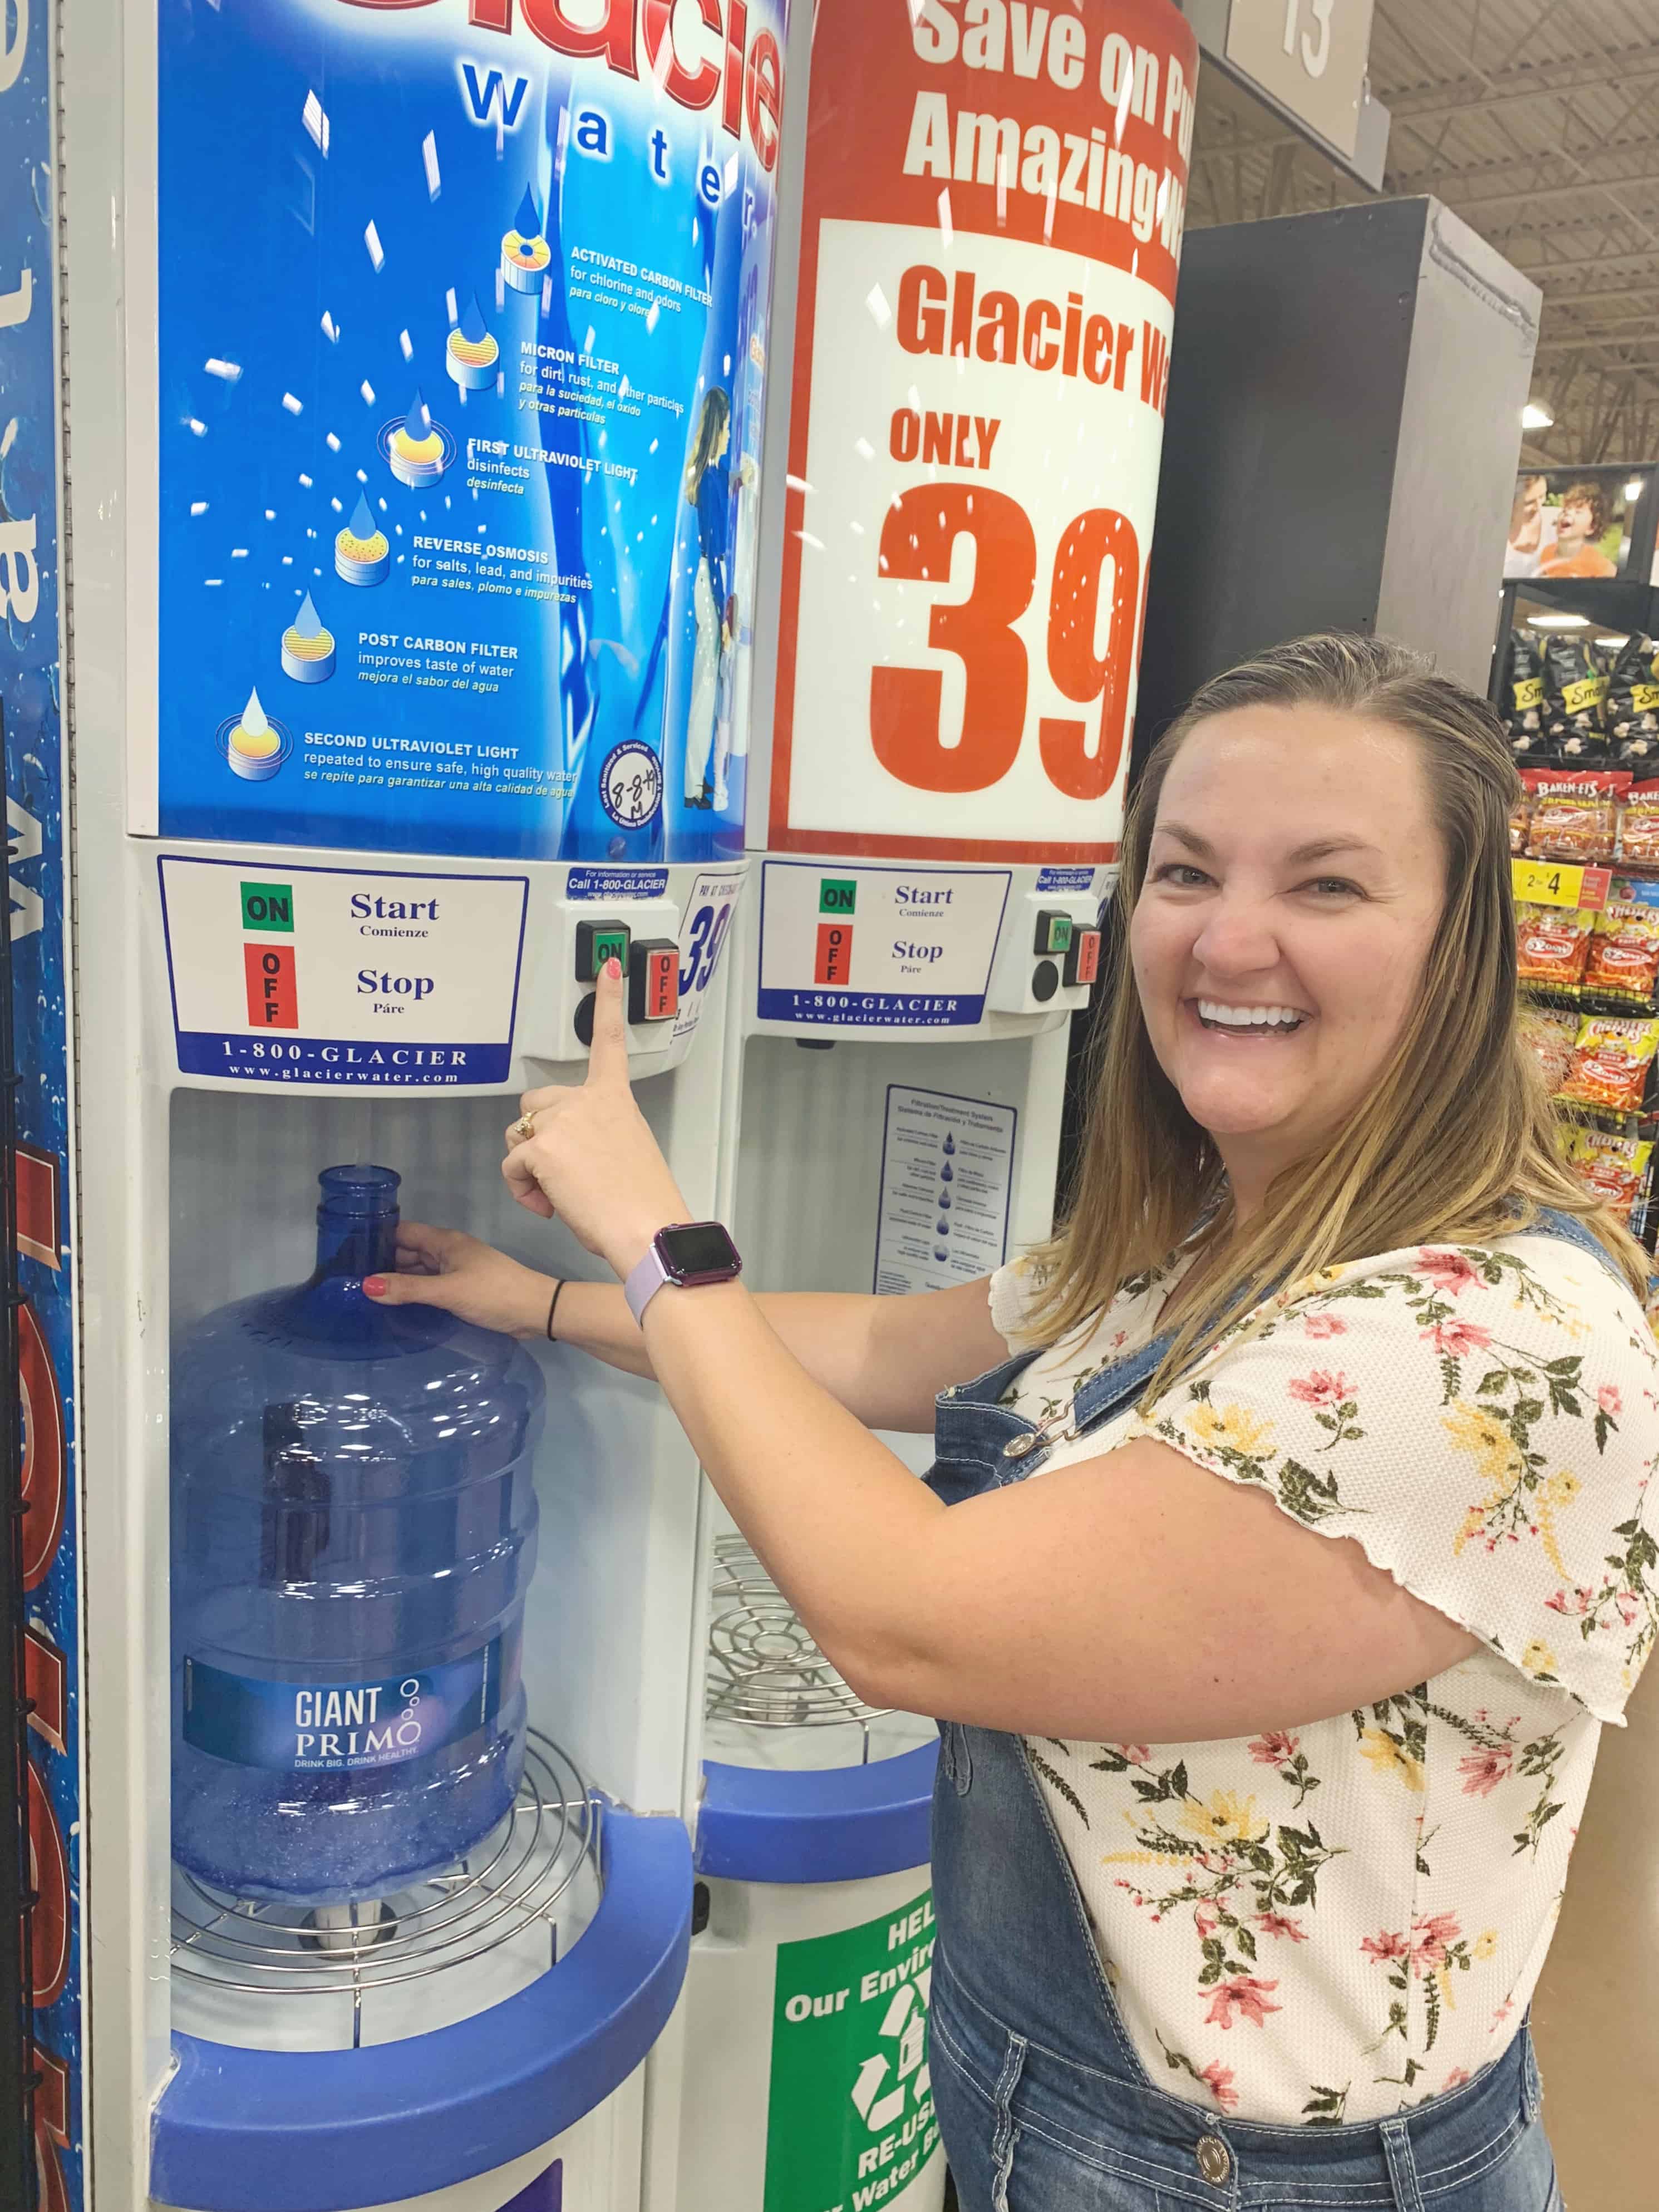 The Primo Water Dispenser that Changed Our Lives! - We Got The Funk